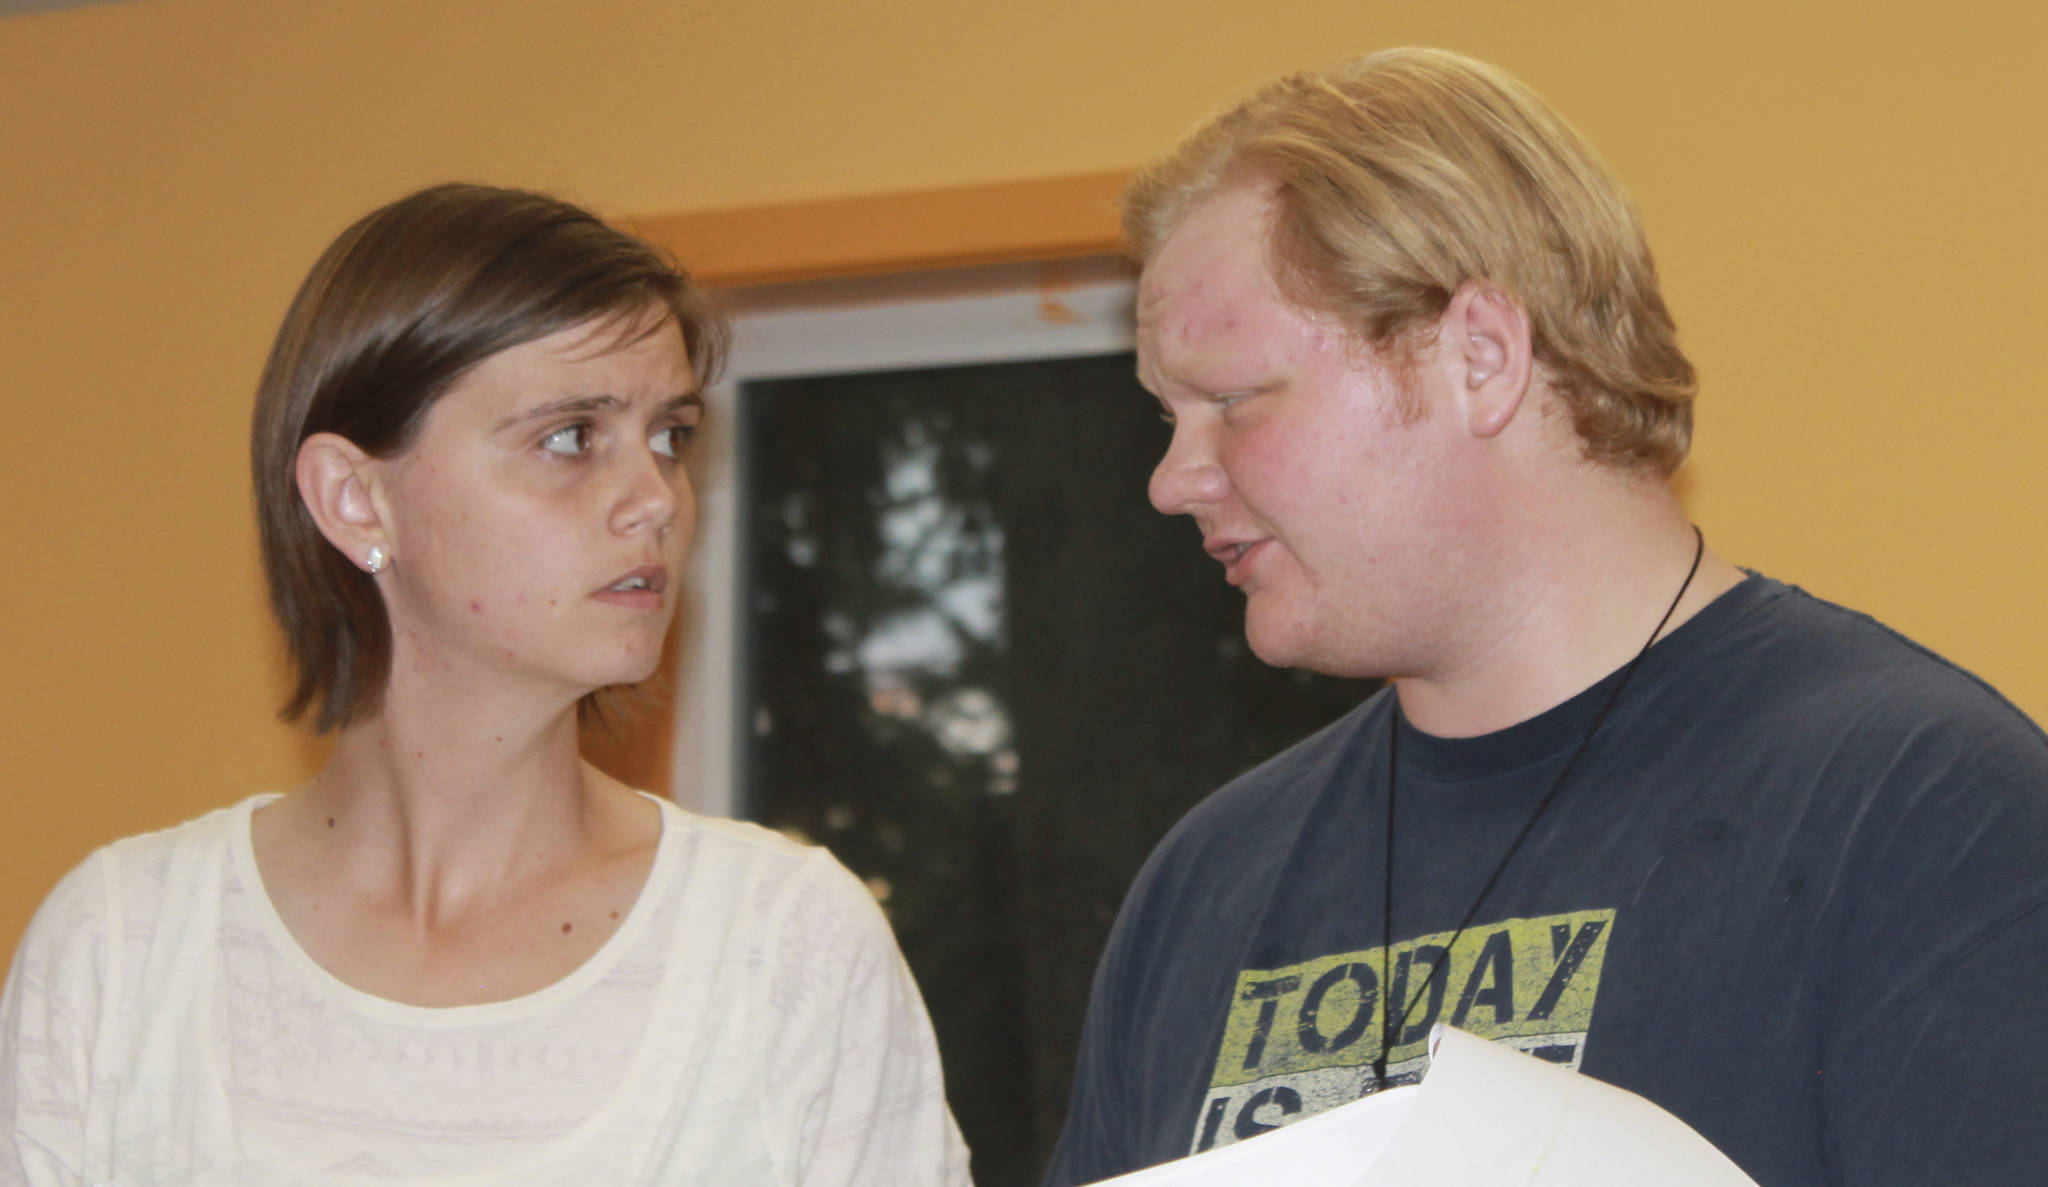 Staff photo/Heather Spaulding                                Raena Parsons and Michael Jewett in “Rabbits on the Rock.”